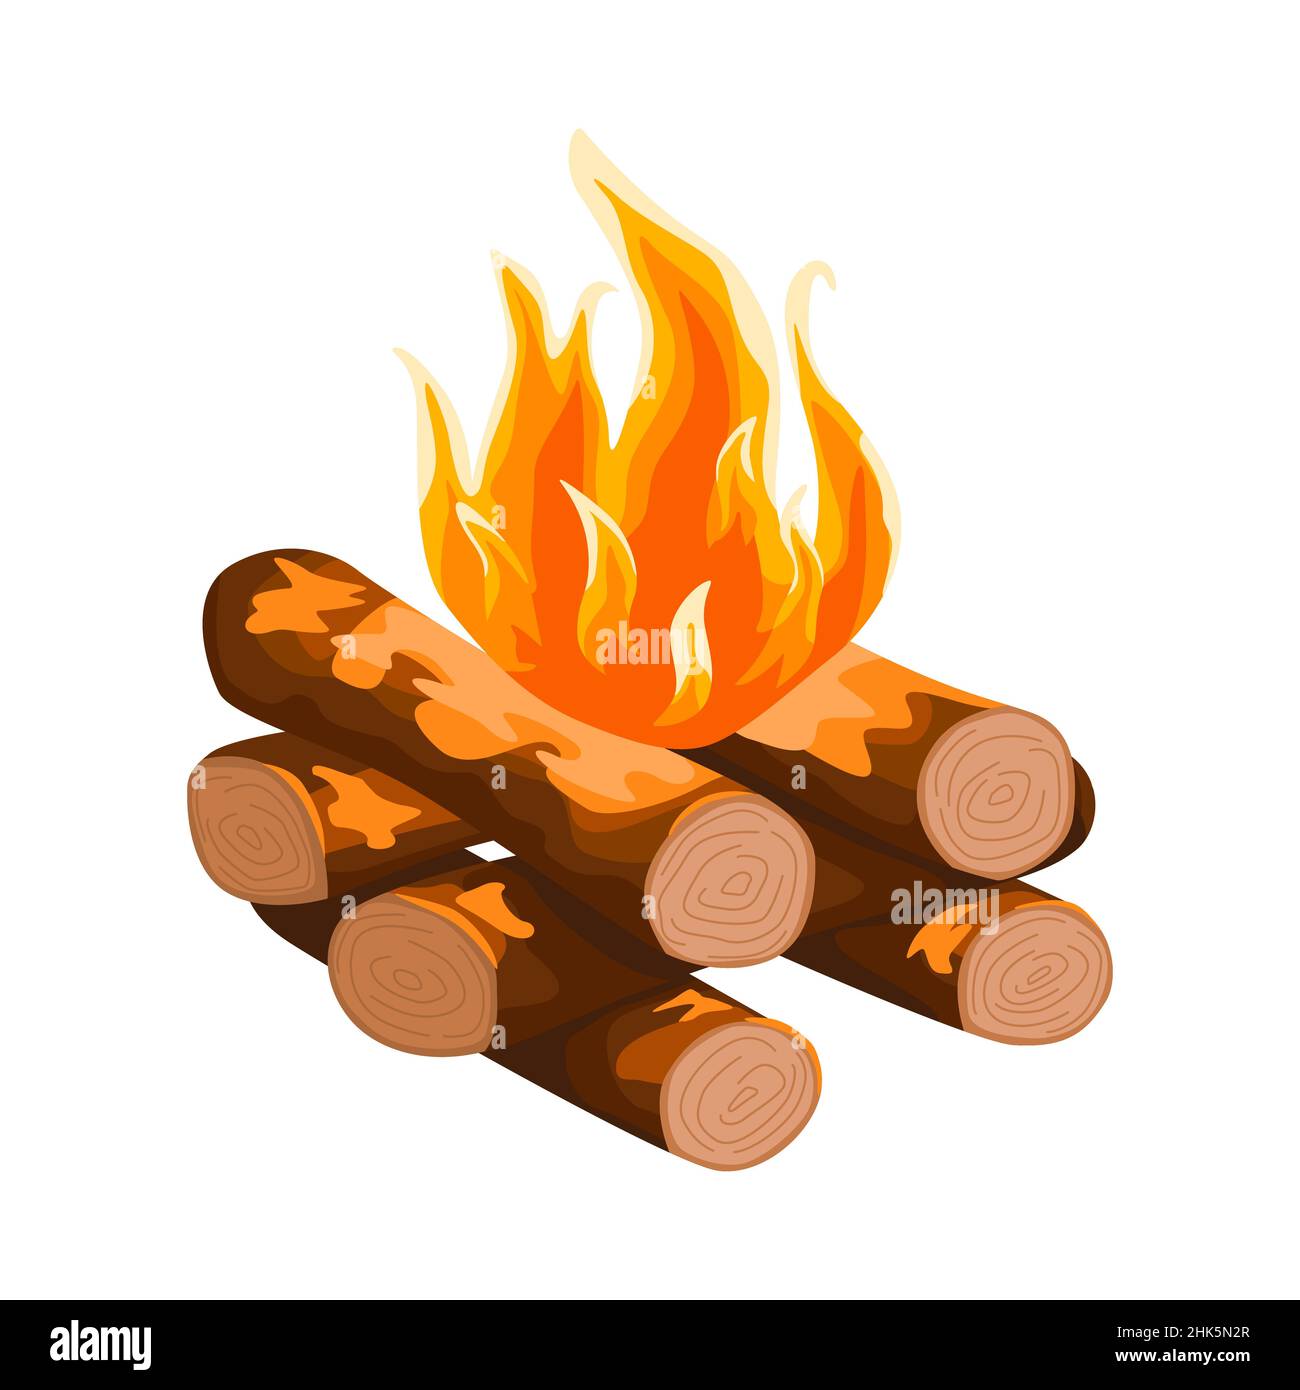 Log cabin campfire isolated on white background. Hiking fireplace in flat style. Cartoon vector illustration for any purpose. Stock Vector